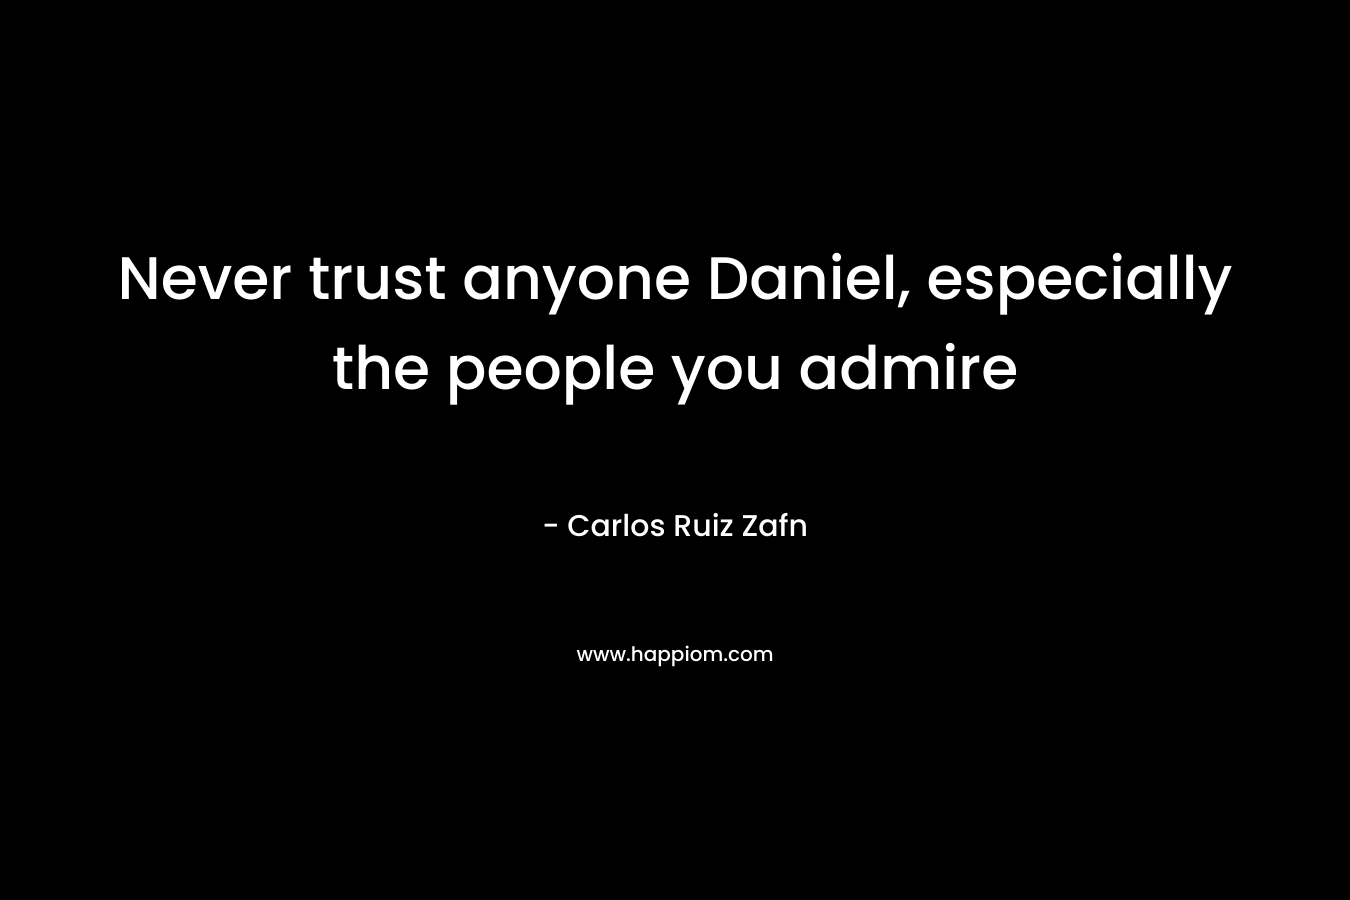 Never trust anyone Daniel, especially the people you admire